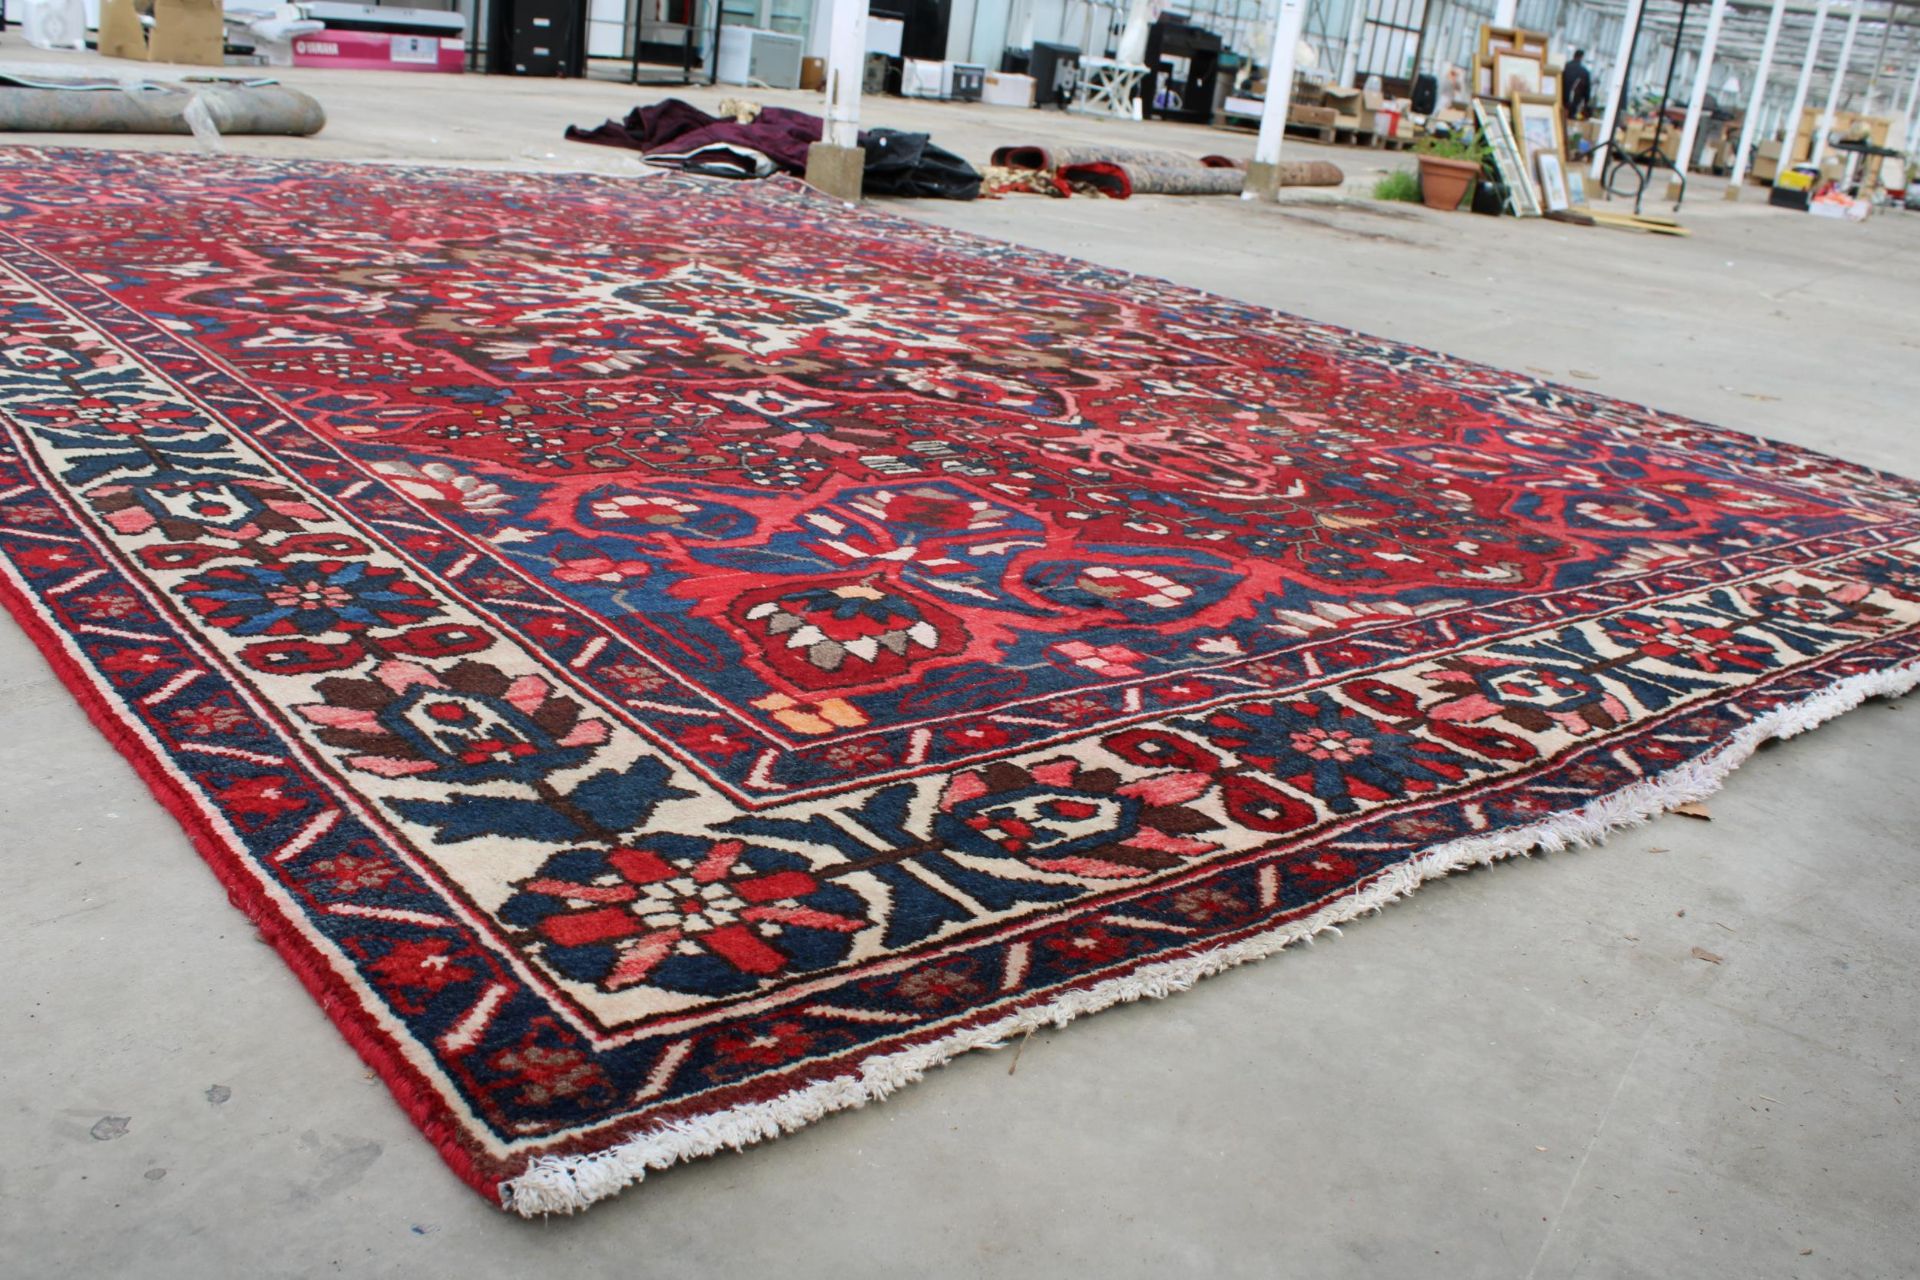 A LARGE RED PATTERNED FRINGED RUG - Image 5 of 5